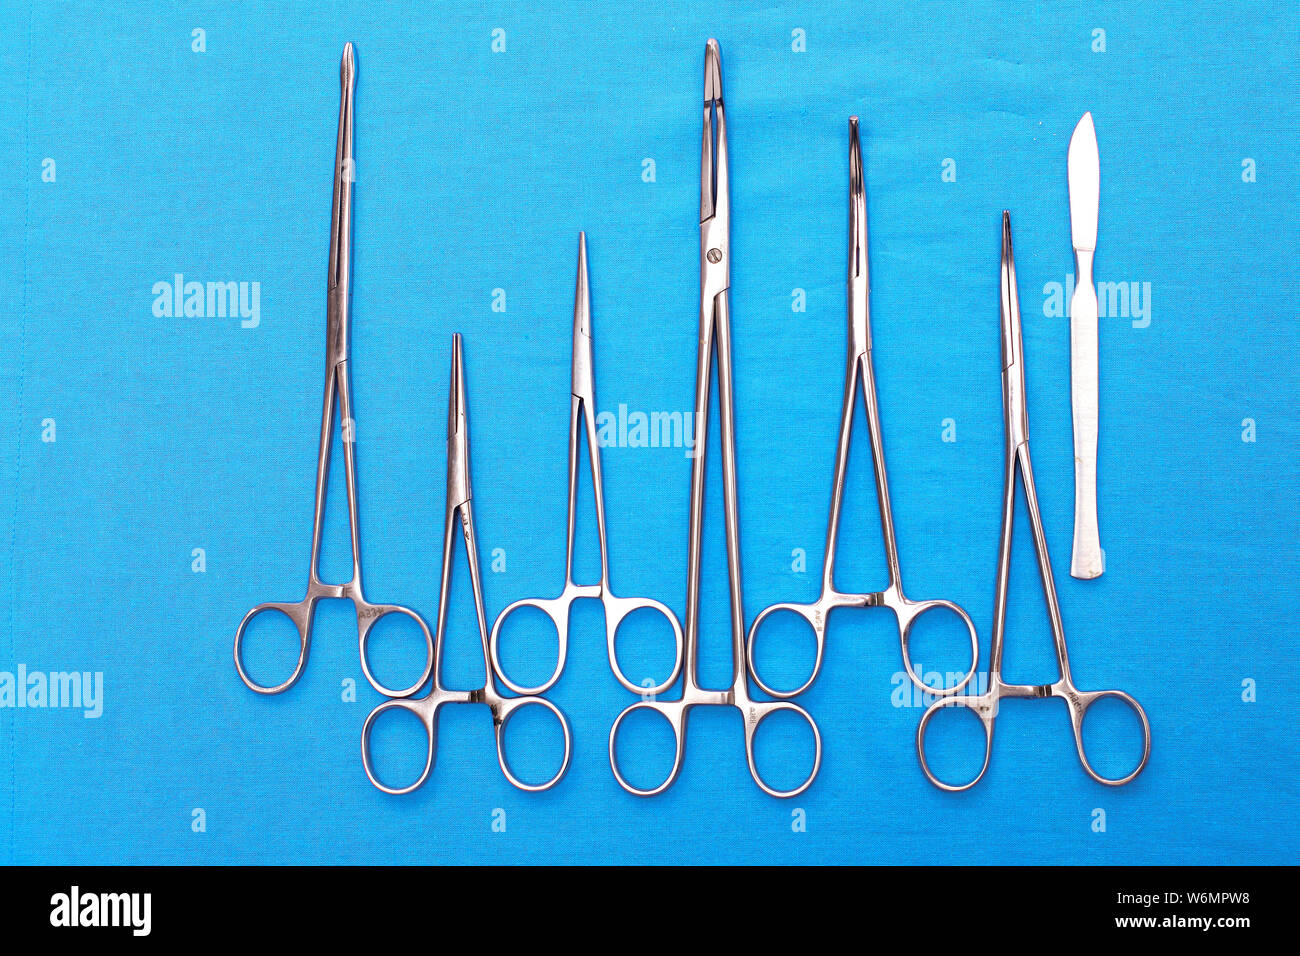 surgical instruments and tools including scalpels, forceps and tweezers arranged on a table for a surgery. Stock Photo